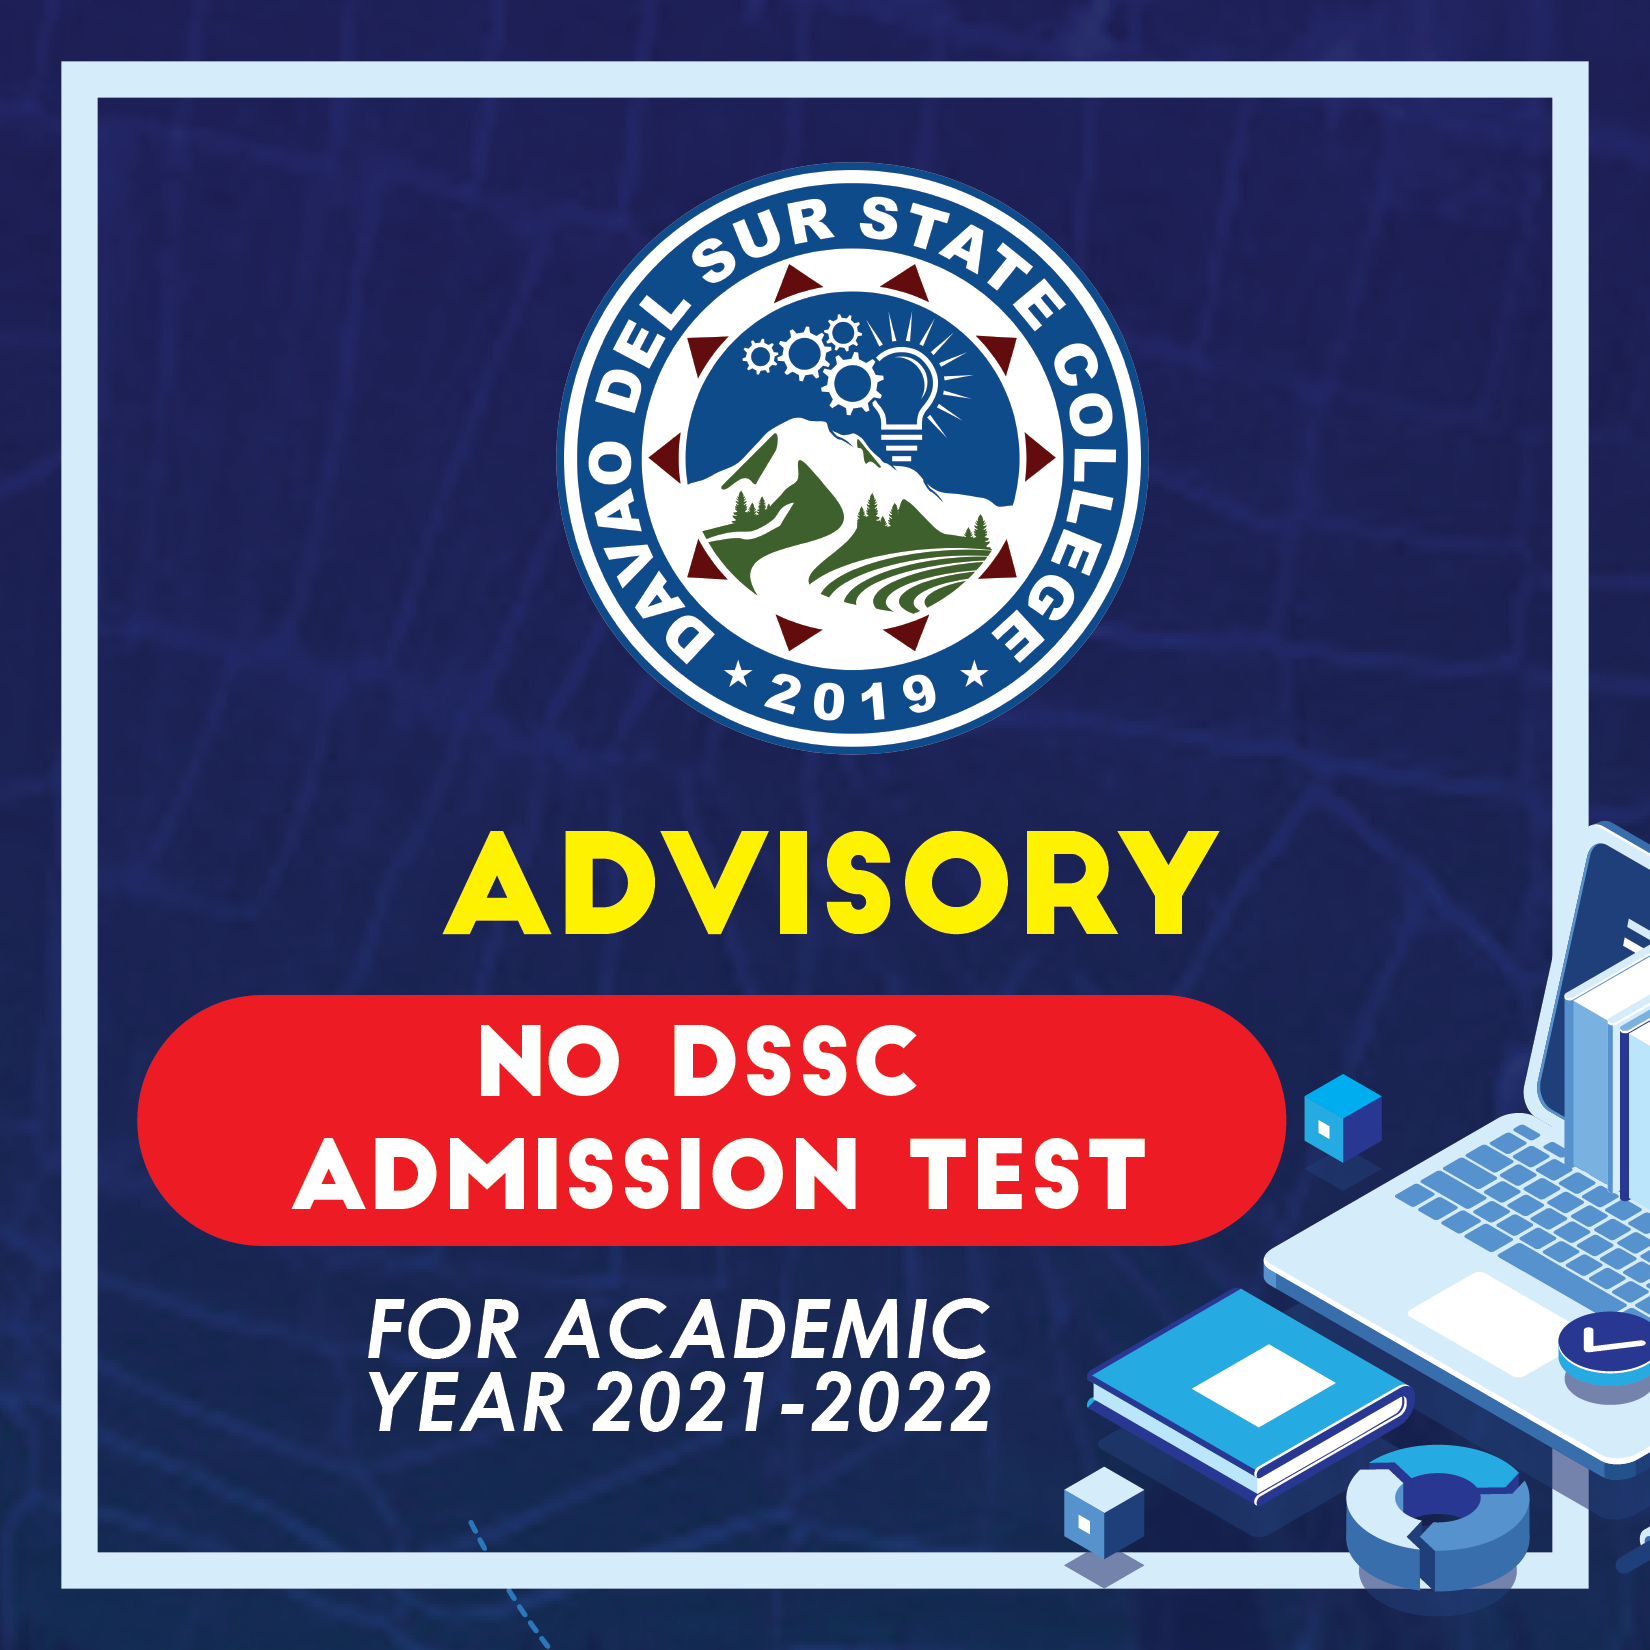 DSSC-Admission for School Year 2021-2022